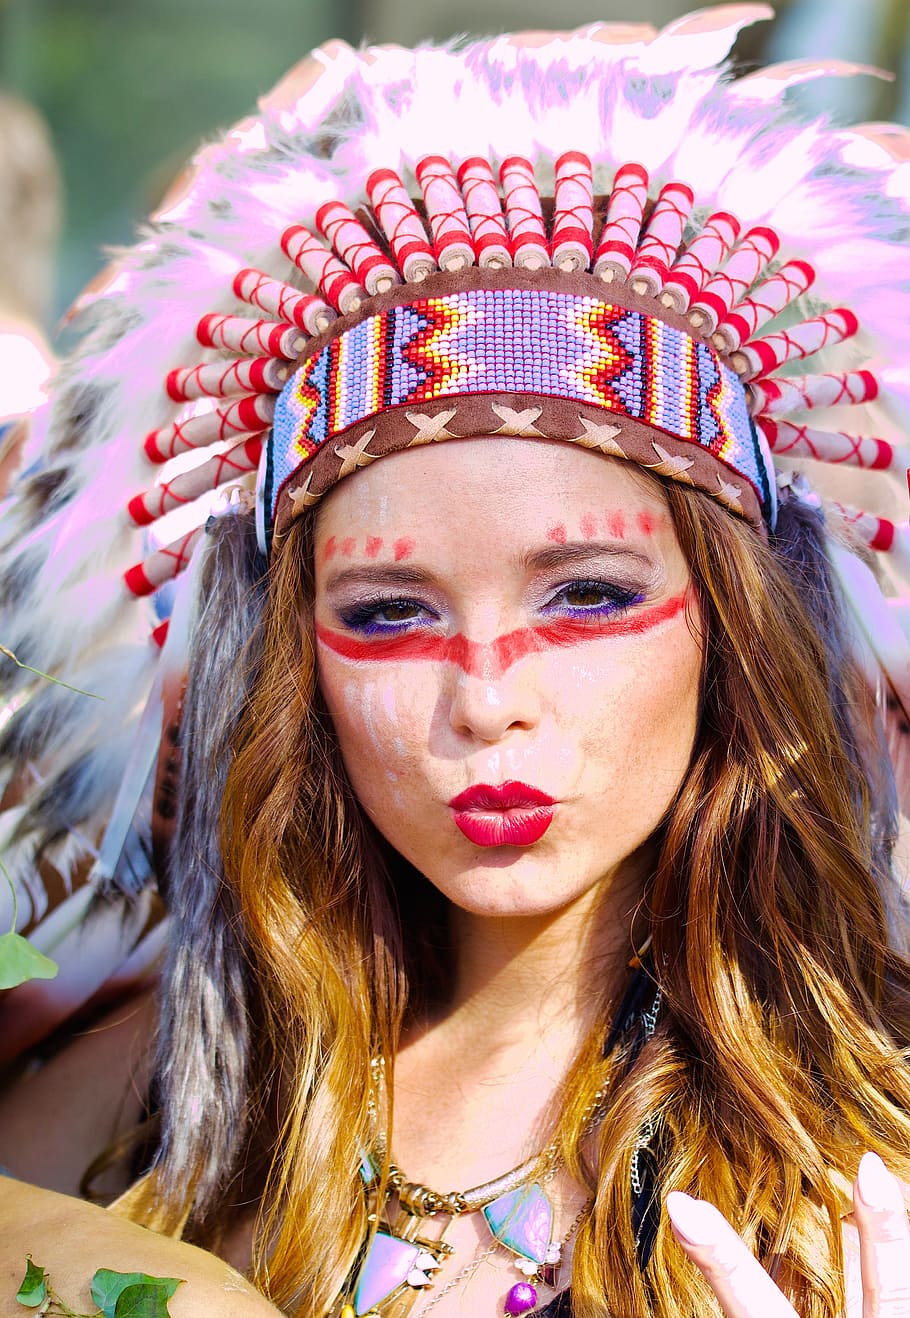 woman, native, american costume, makeup, human, street parade, portrait, indians, spring jewelry, cultures